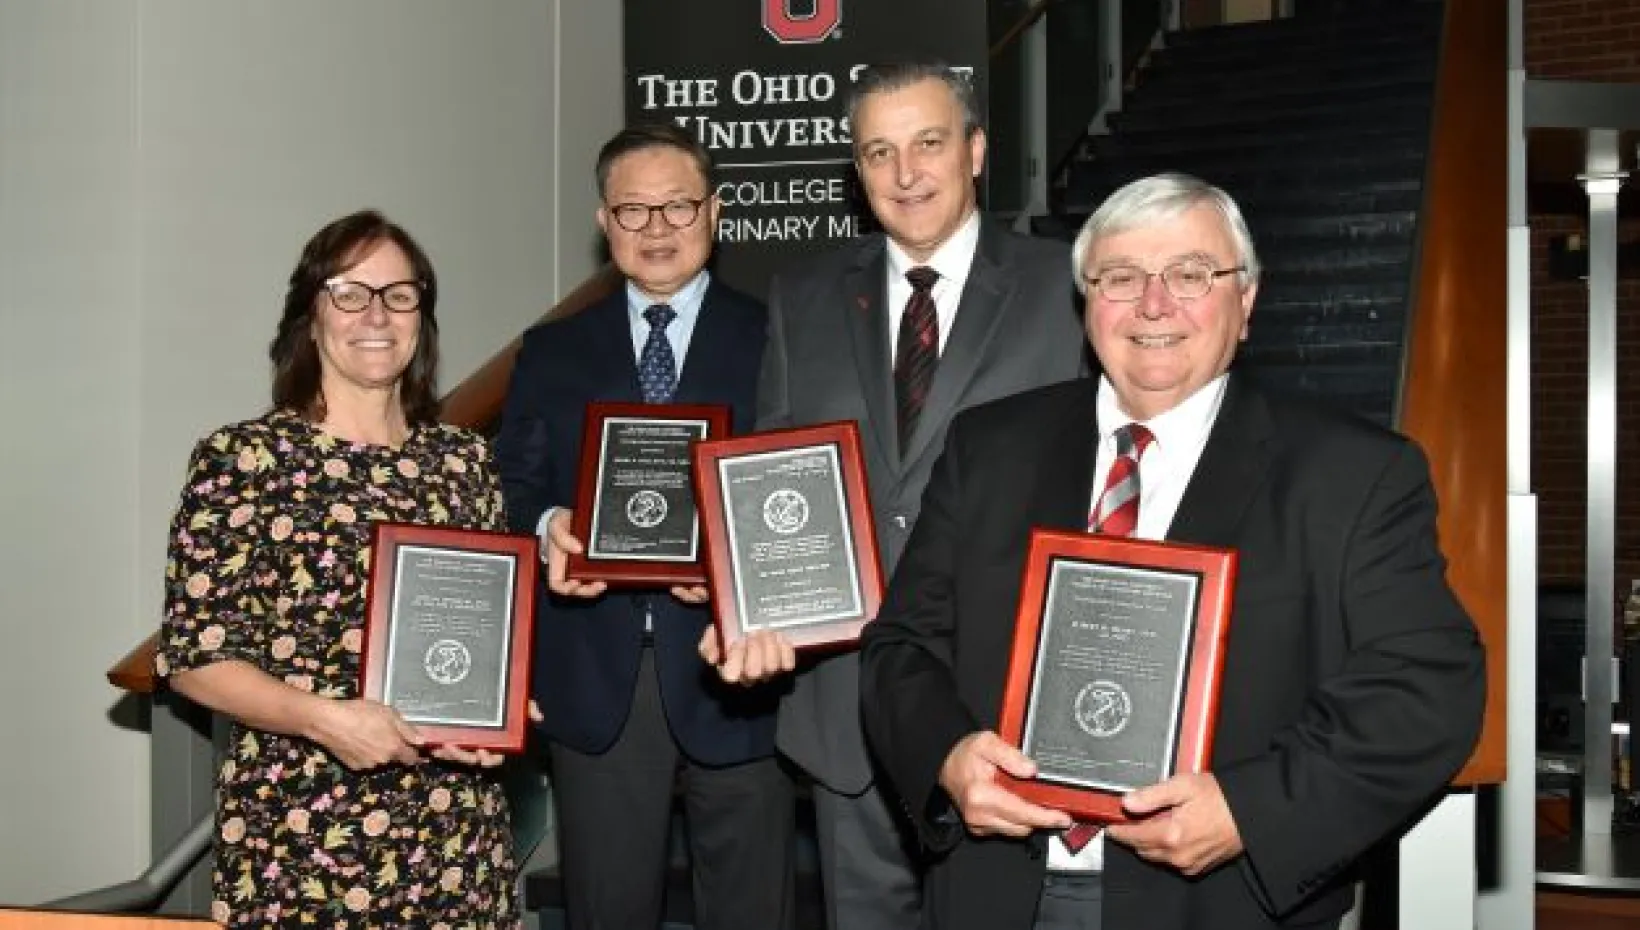 Four people receiving awards from The Ohio State University College of Veterinary Medicine